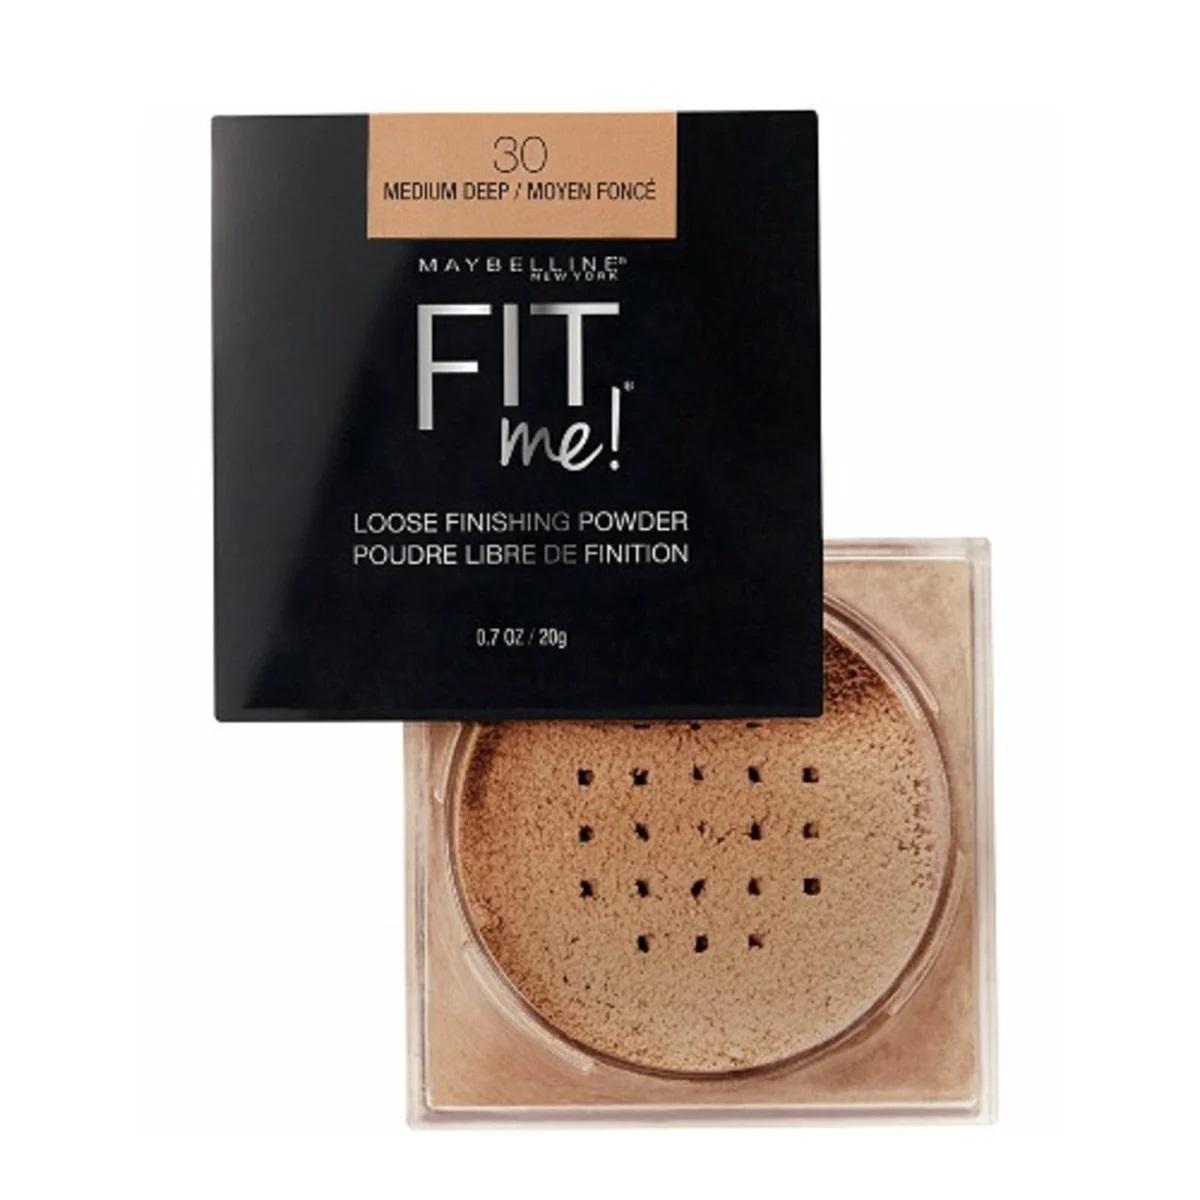 Maybelline Fit Me! Loose Finishing Powder